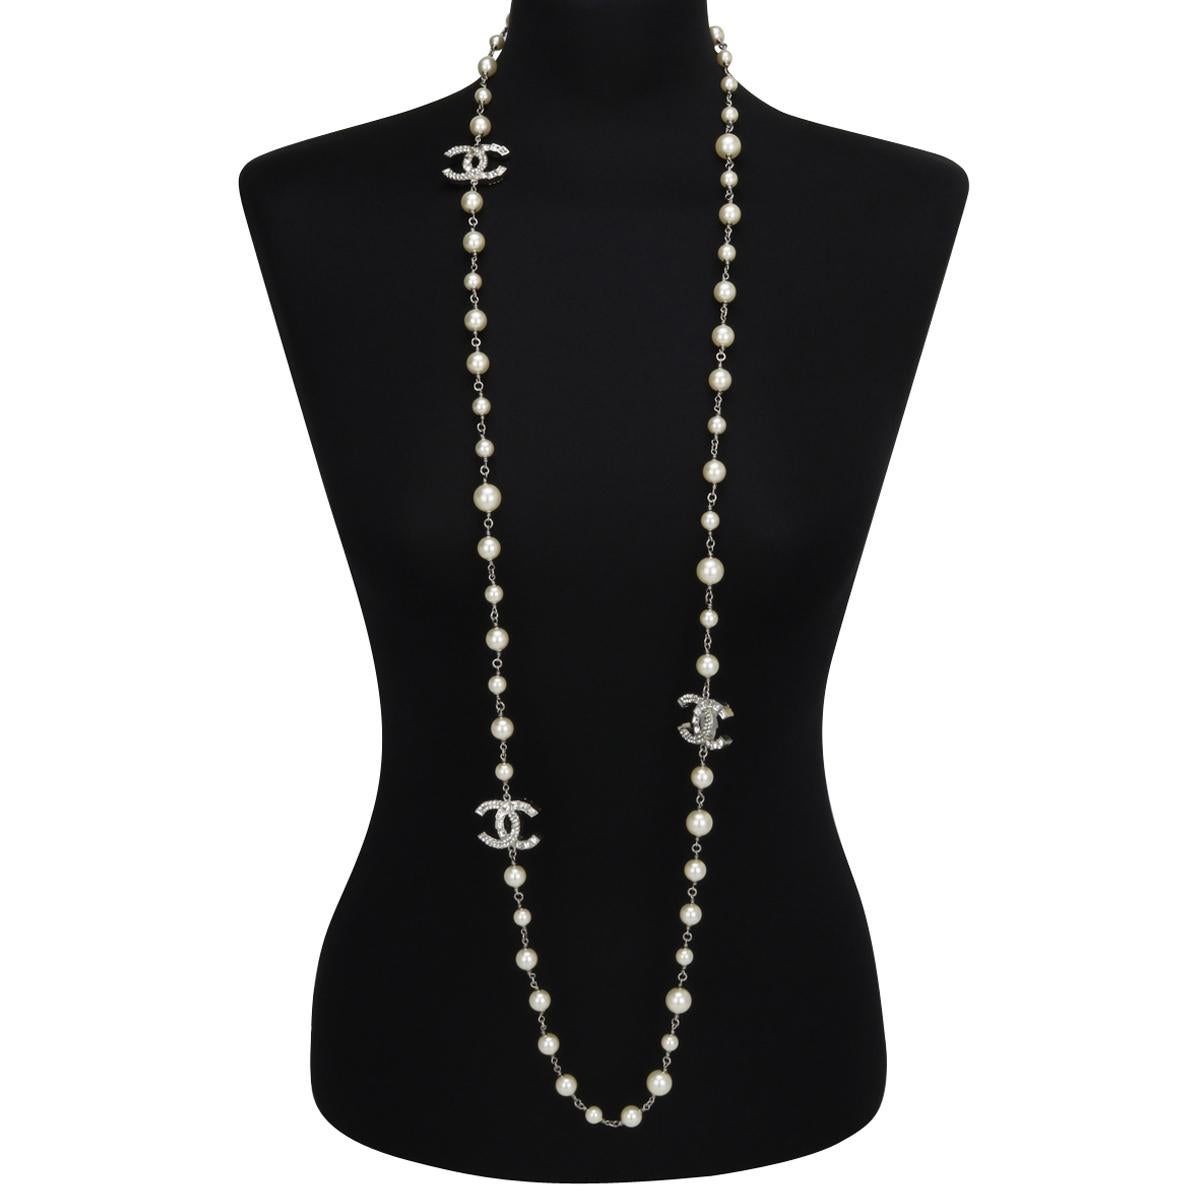 Authentic CHANEL CC Faux Pearl Crystal Silver Long Necklace 2014 (B14 C).

This stunning long necklace is in excellent condition.

It is made of exquisite various-sized baroque pearl beads, with large interlocking CCs pendants with crystal stones on